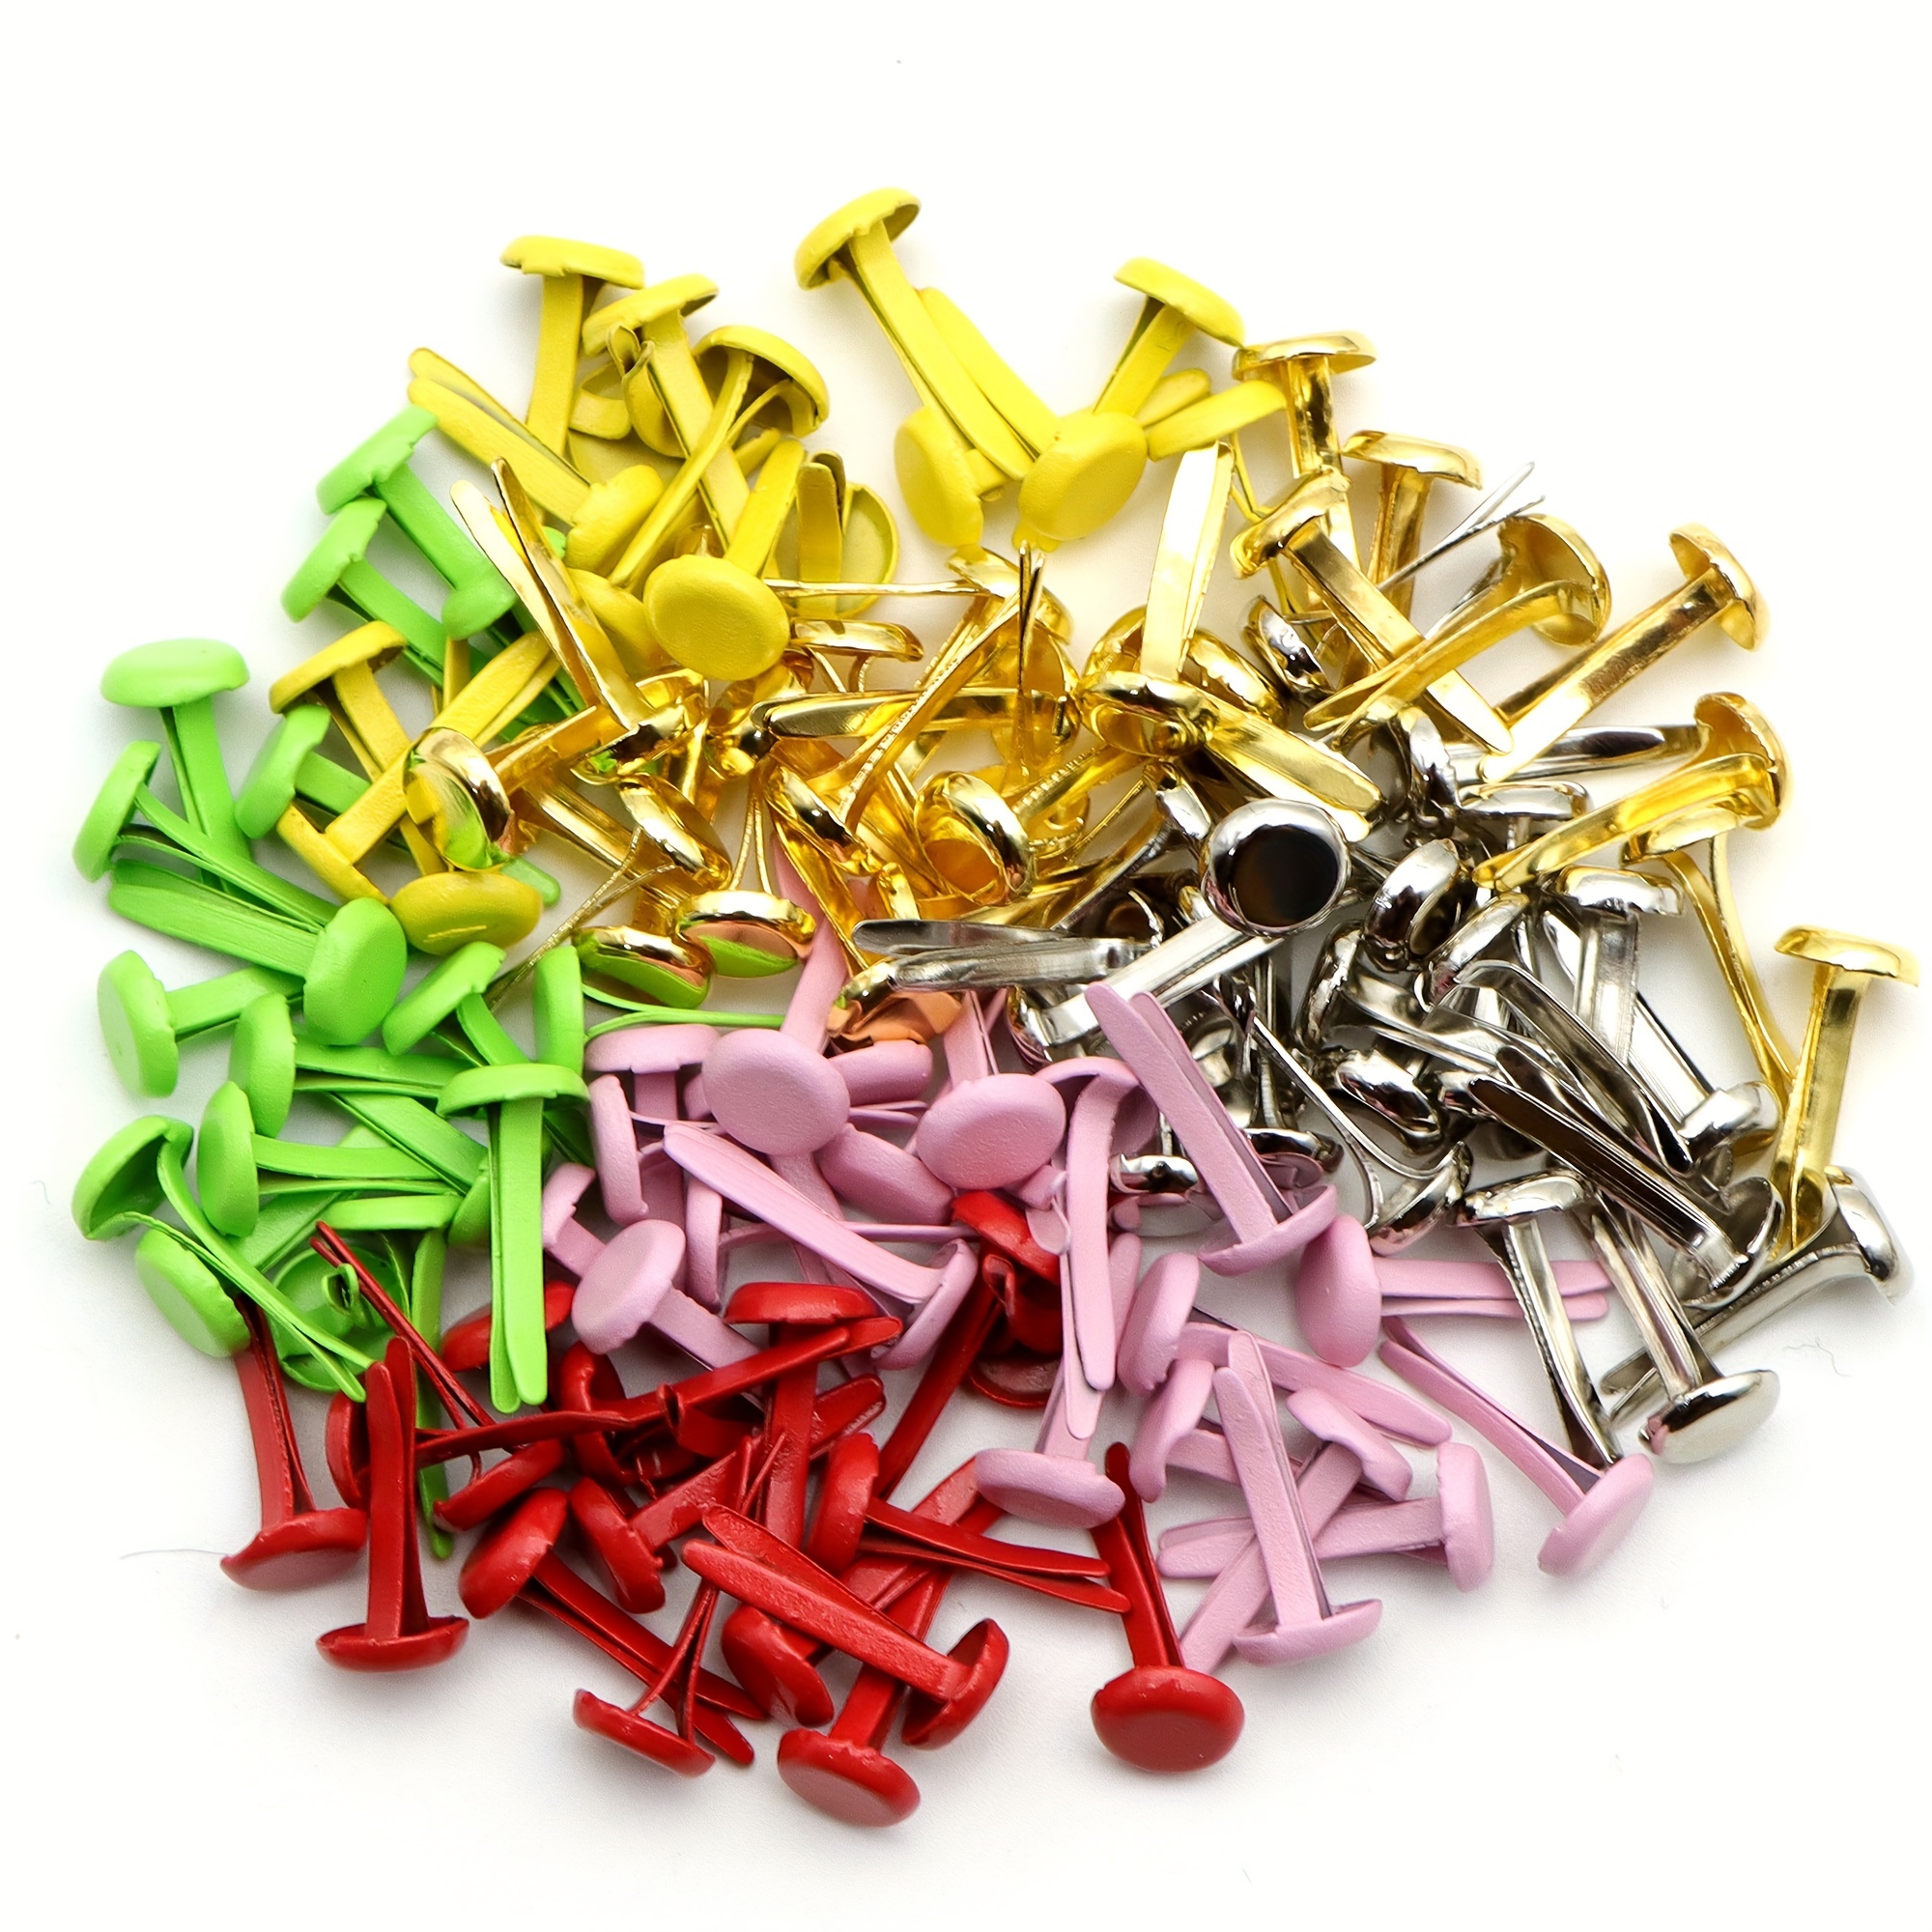 Prong Fasteners For Standard 2 Hole Punch, Metal Prong Paper